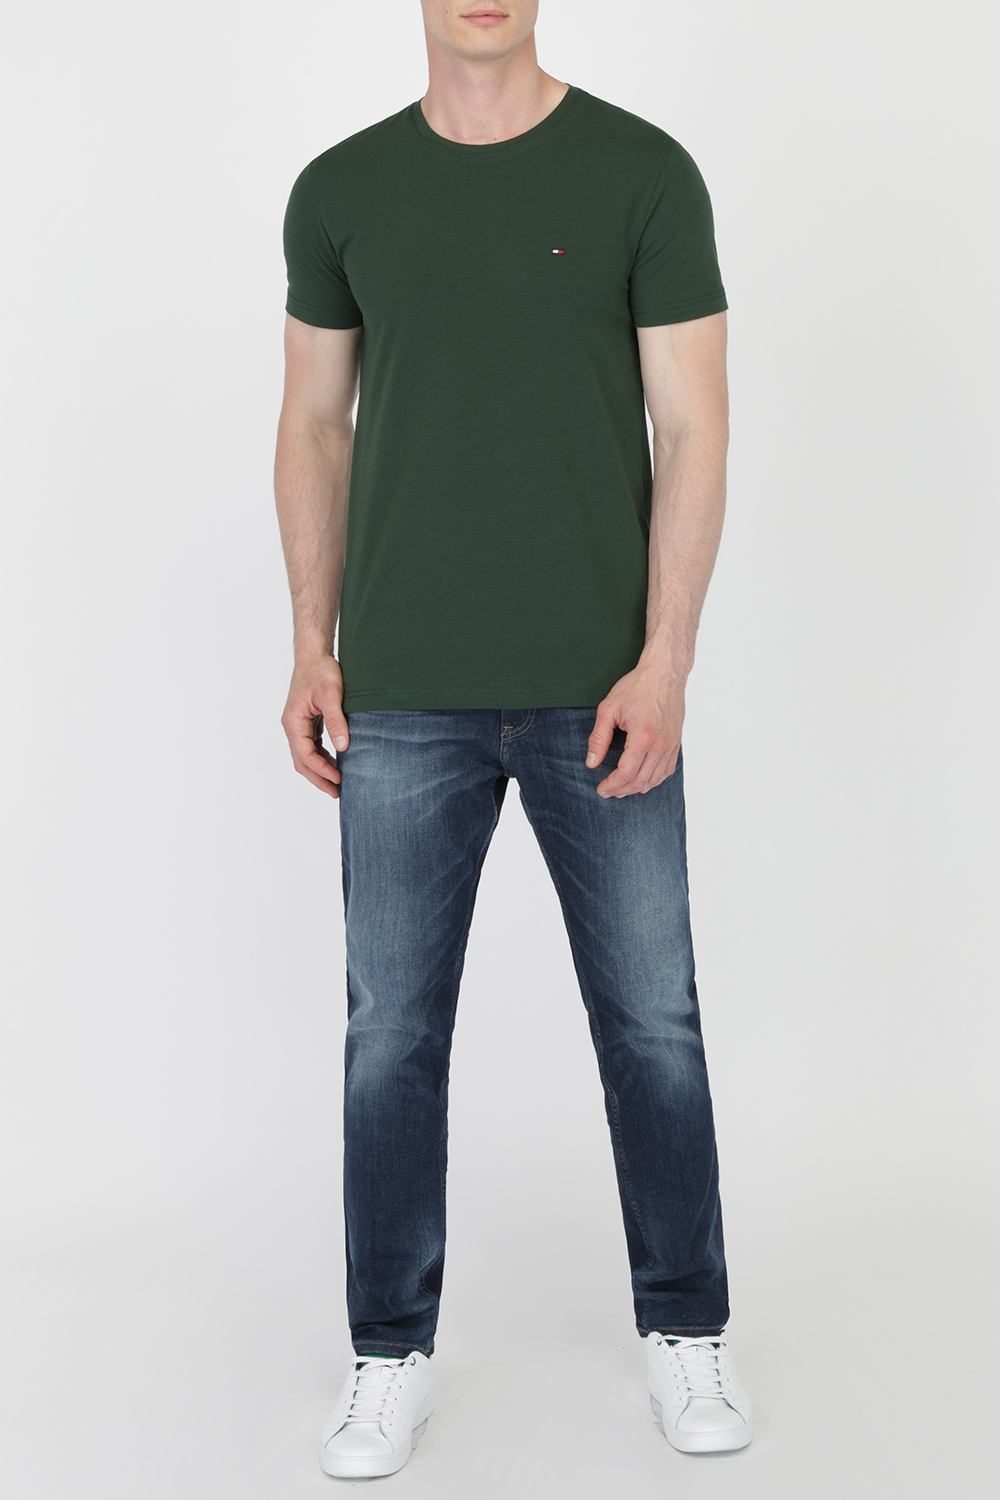 Organic Cotton Slim Fit Tee in Pine Grove TOMMY HILFIGER